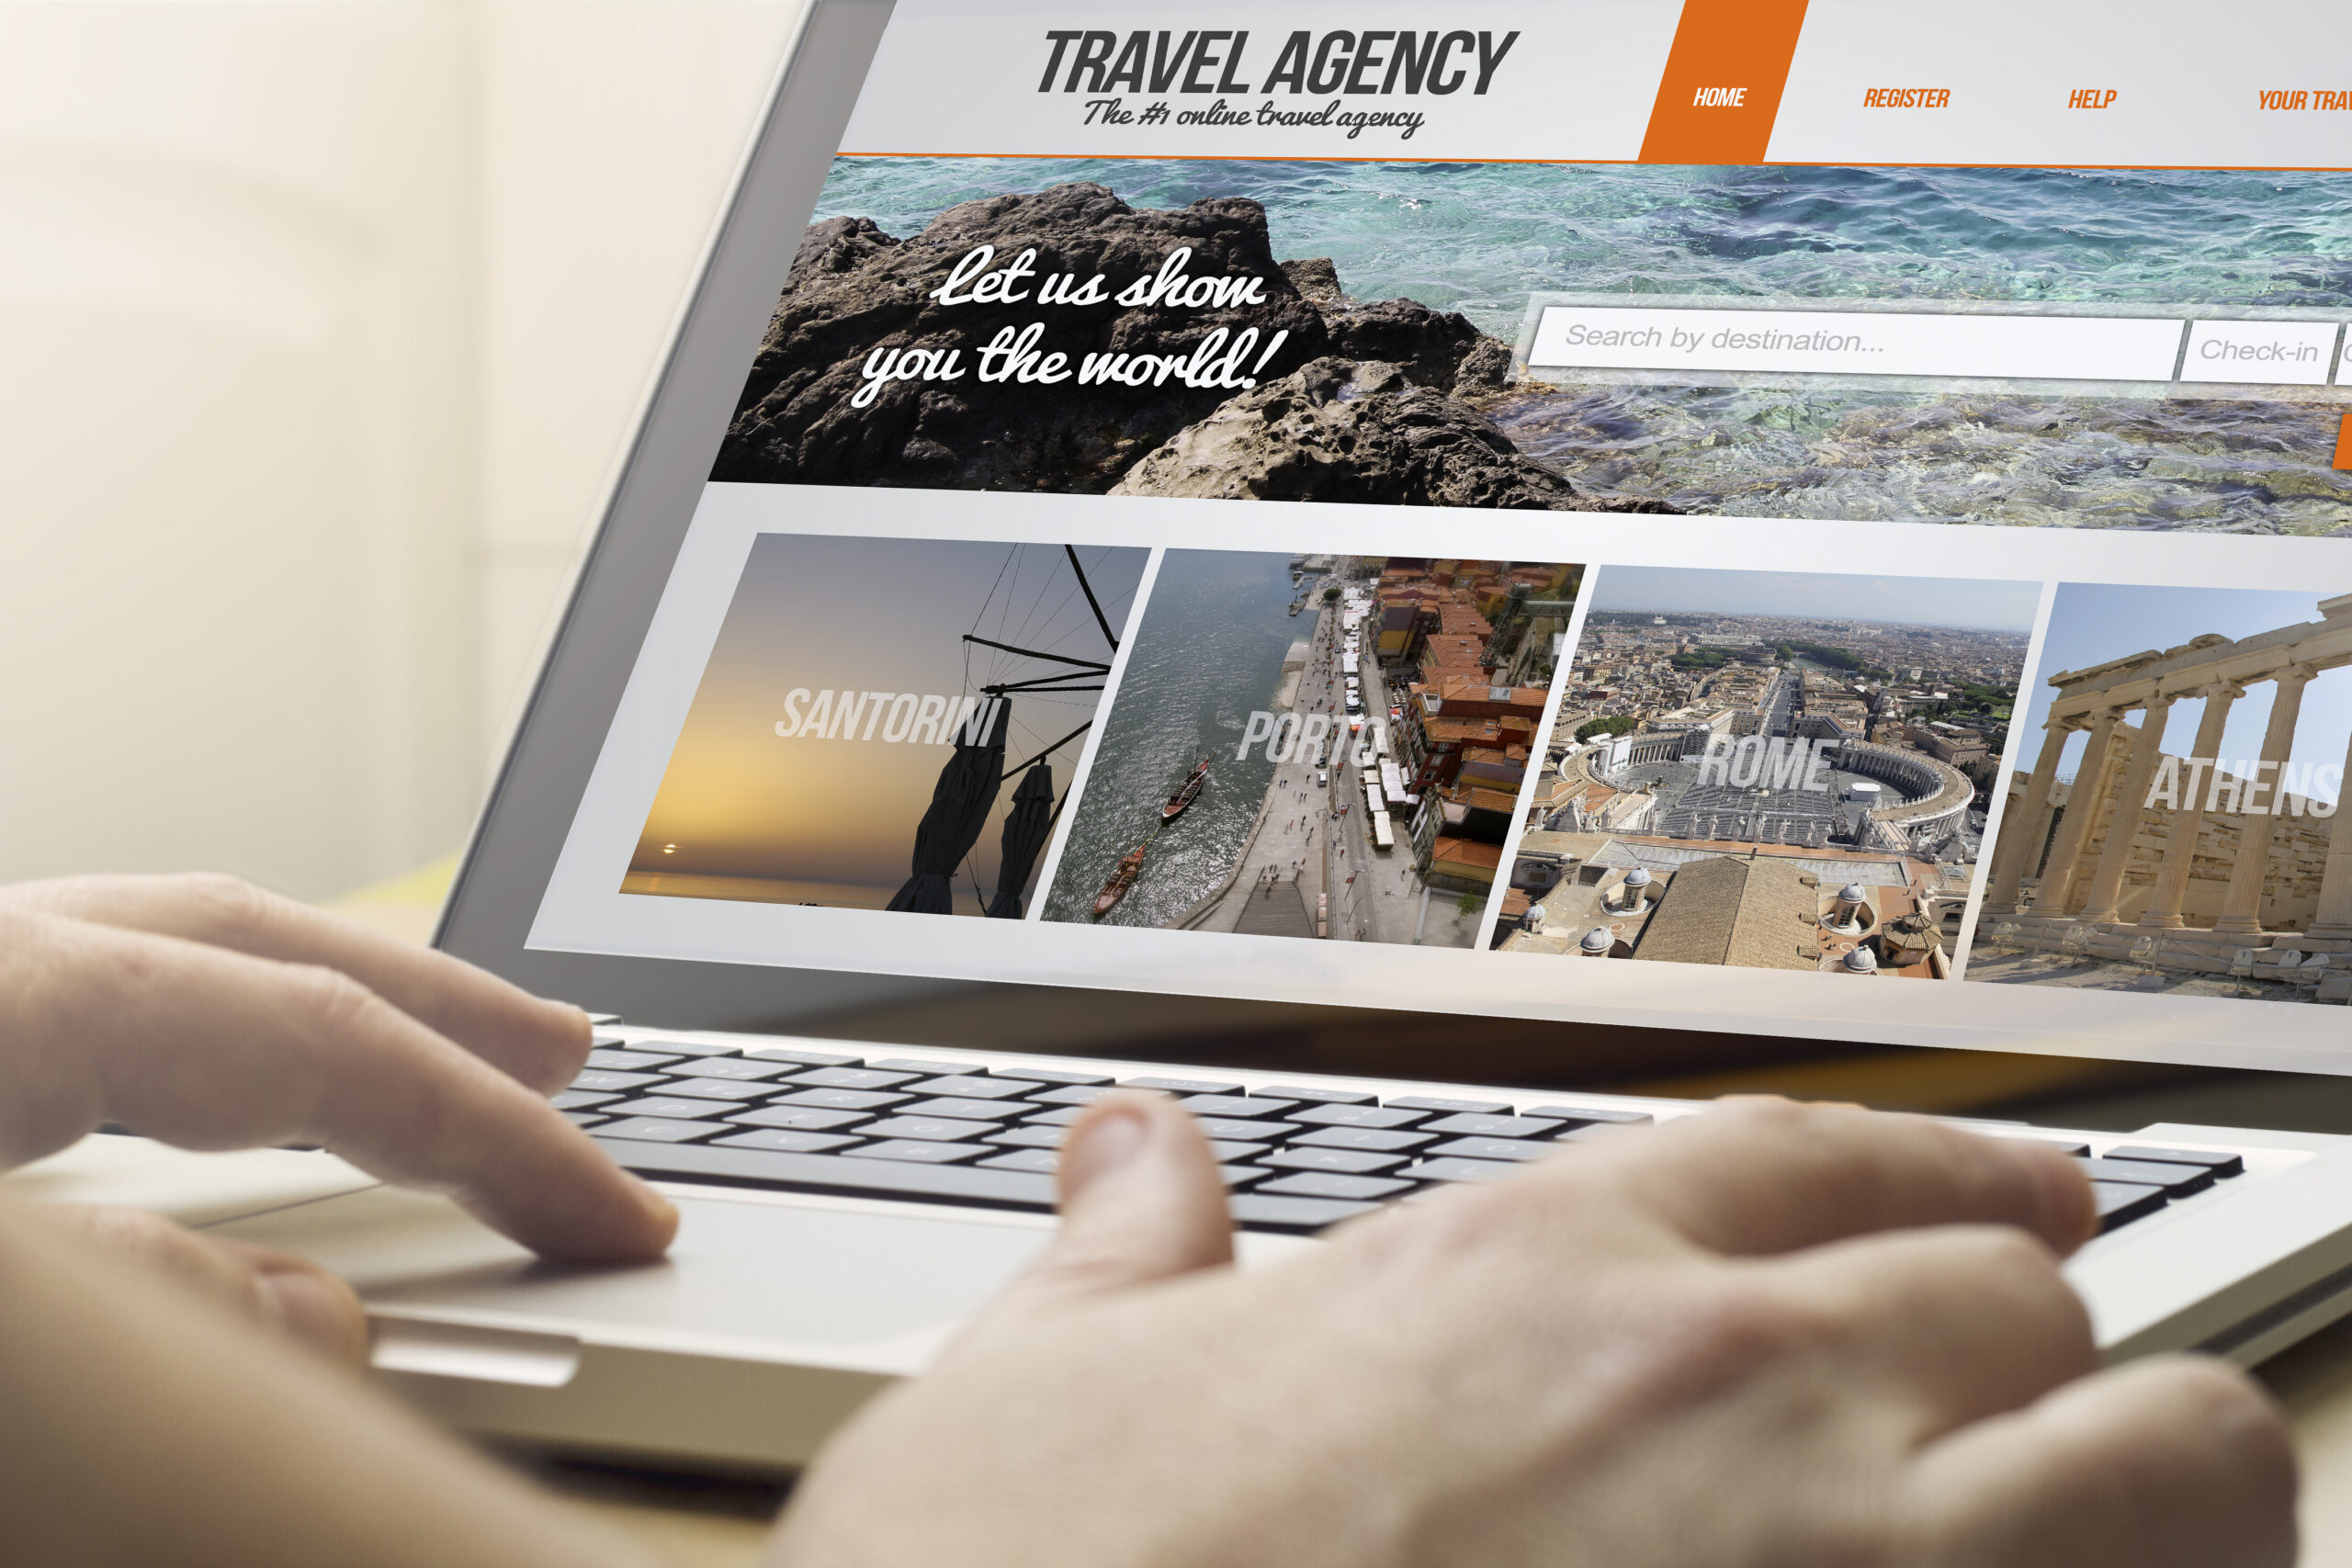 travel agency online business ideas